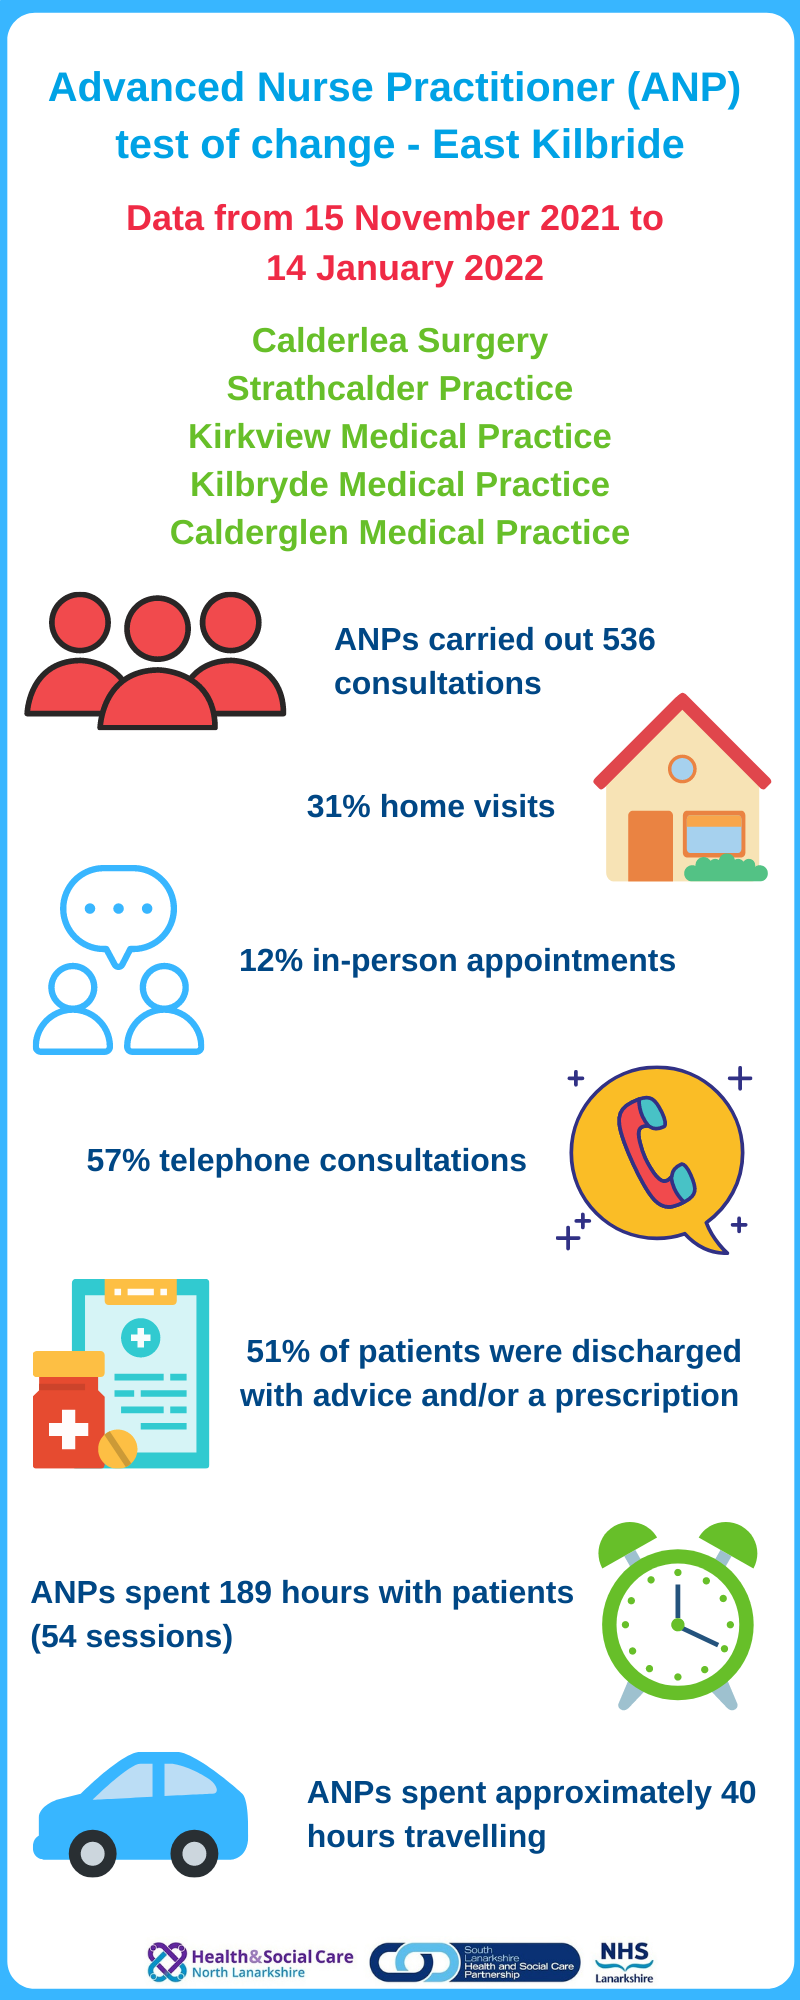 Advanced Nurse Practitioner (ANP) test of change started in East Kilbride, Data from 8 November 2021 to 14 January 2022, Calderlea Surgery, Strathcalder Practice, Kirkview Medical Practice, Kilbryde Medical Practice, Calderglen Medical Practice, ANPs carried out 536 consultations, 31% home visits, 12% in-person appointments, 57% telephone consultations, 51% of patients were discharge with advice and/or a prescription, ANPs spent 189 hours with patients (54 sessions), ANPs spent approximately 40 hours travelling.